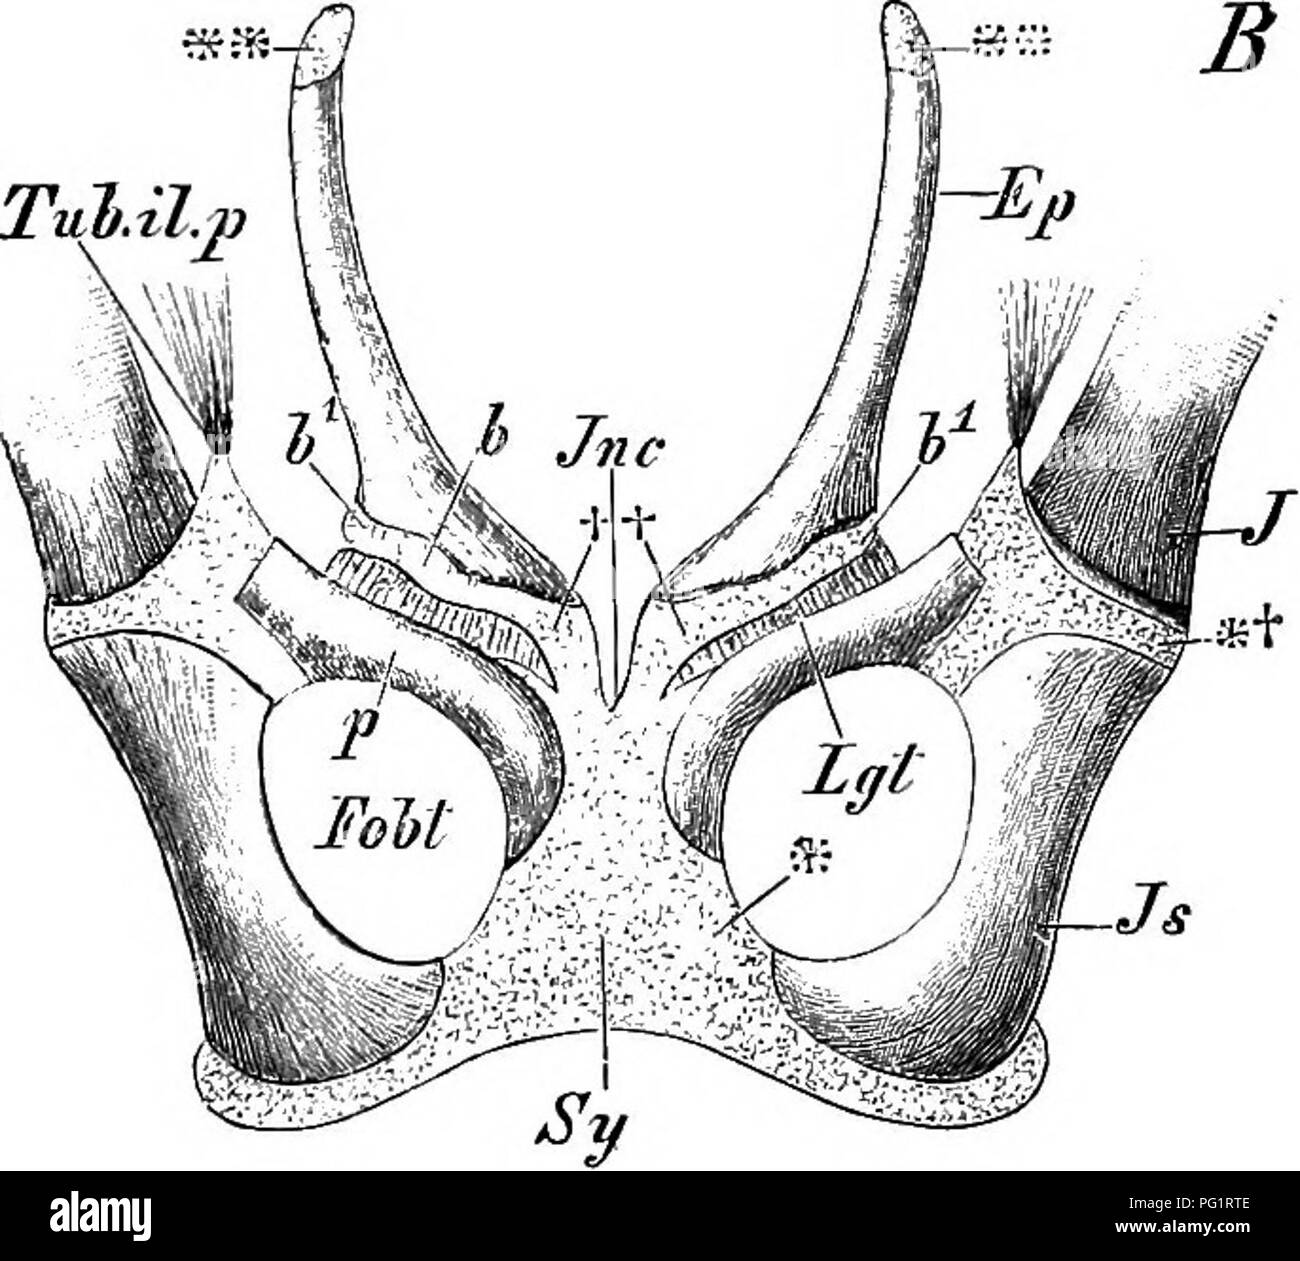 . Elements of the comparative anatomy of vertebrates. Anatomy, Comparative. TubAlp rp 7 -7. Fio. 100.—Pelvis or A, Echidna hyutrix (Adult), and B, Didelpliys azarm (FcETUS, 5-5 CM IN Length). (From the ventral side.) Ep, epipubis (&quot;marsupial bone&quot;) ; P, pubis; Sy, ischiopubic symphysis; Js, ischium ; /, ilium ; Foht, obturator foramen ; Tuh.il.p, ilio-peotineal tubercle ; Lg and Lgt, ligament between the pubis and epipubis ; **, cartilaginous apophysis at the anterior end of the epipubis. In Fig. A, +*, +, ++, ilio- and ischio-pubic sutures ; Z, process on the anterior border of the  Stock Photo